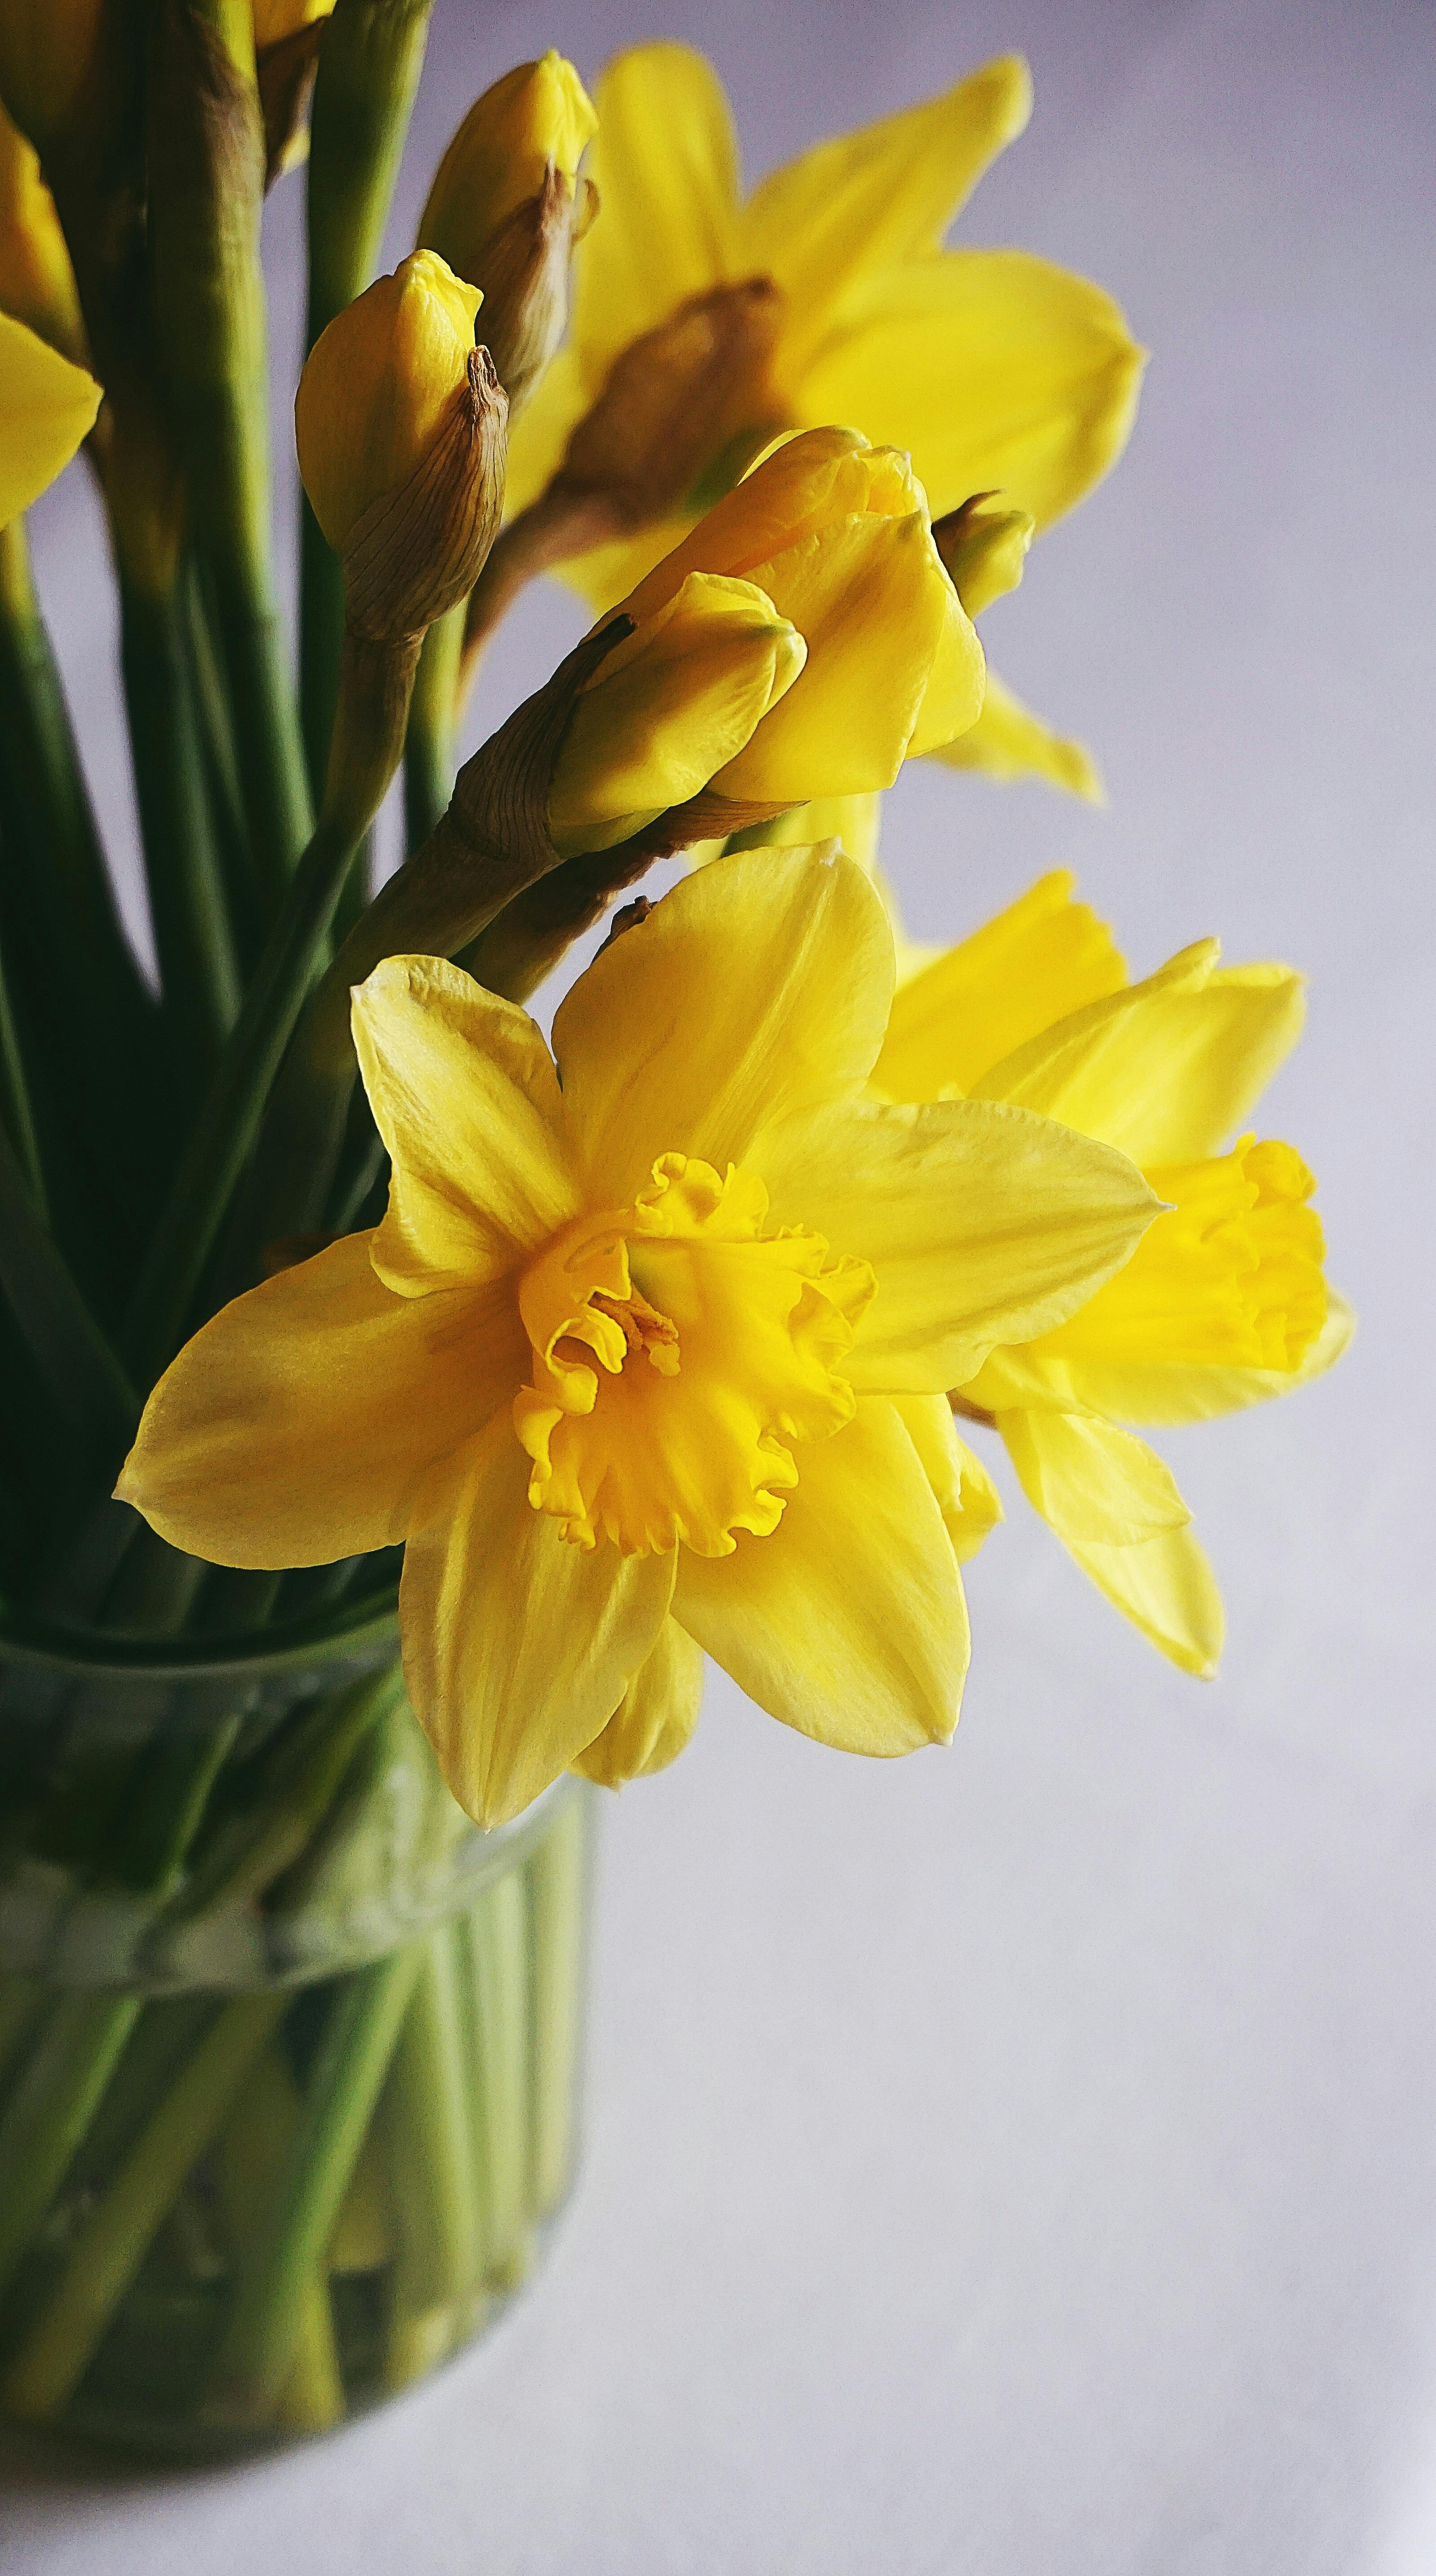 Daffodils Flower Images Gallery | Best Flower Site